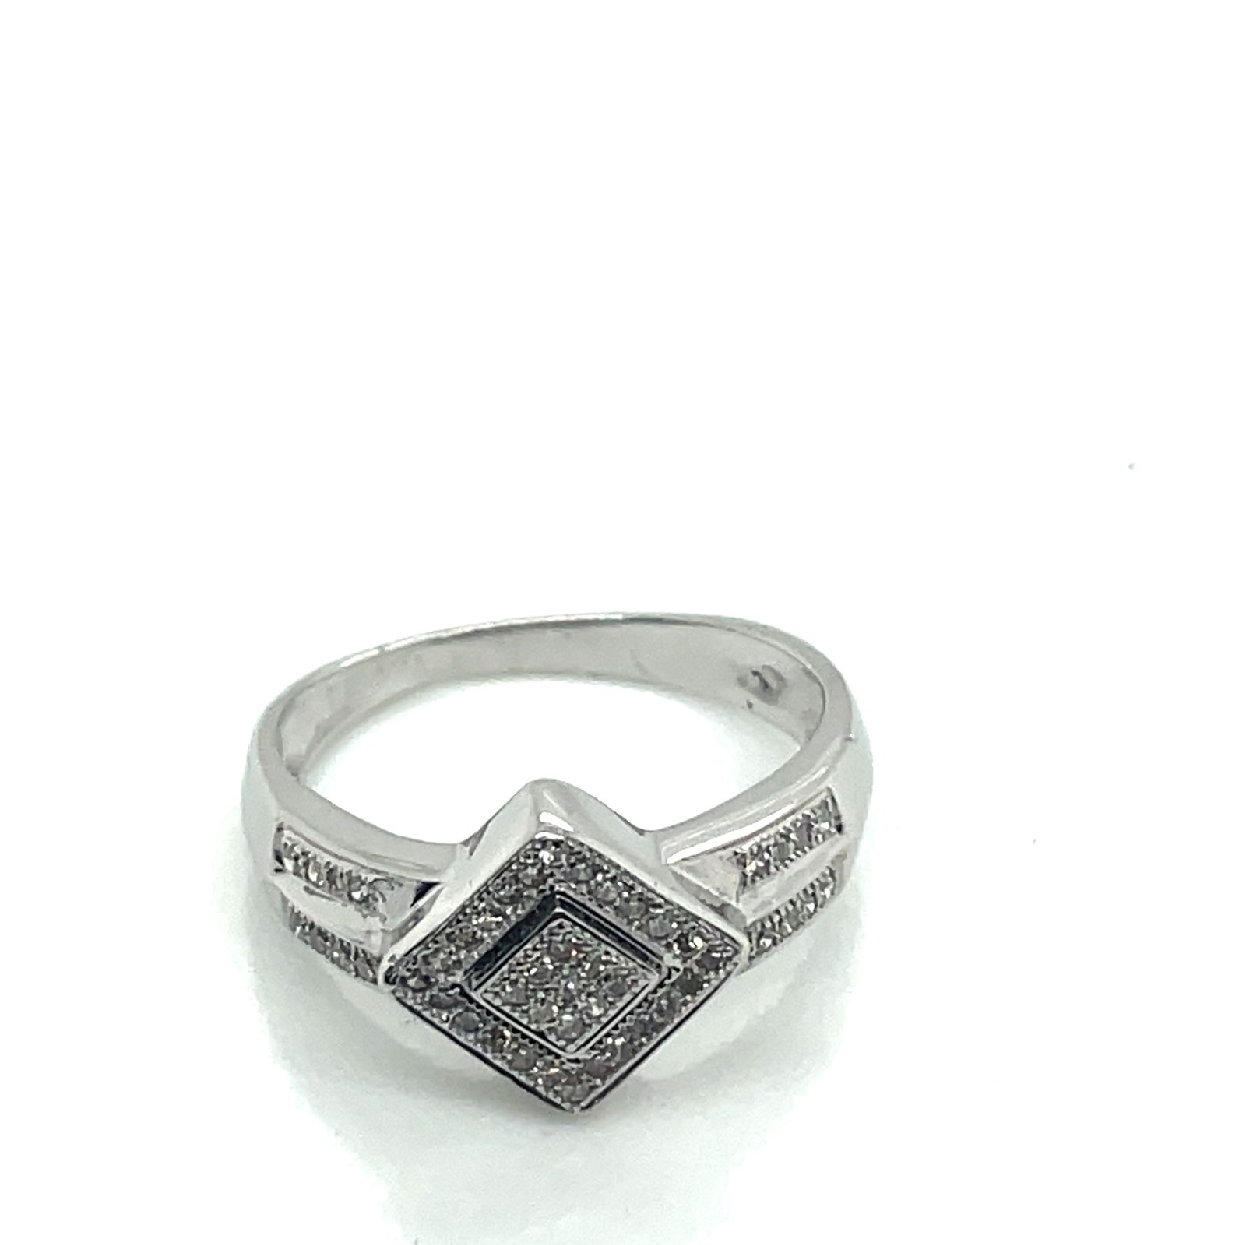 14K White Gold Diamond Ring with Channel Set Diamonds on the Side and Square Shaped Center Size 4.75